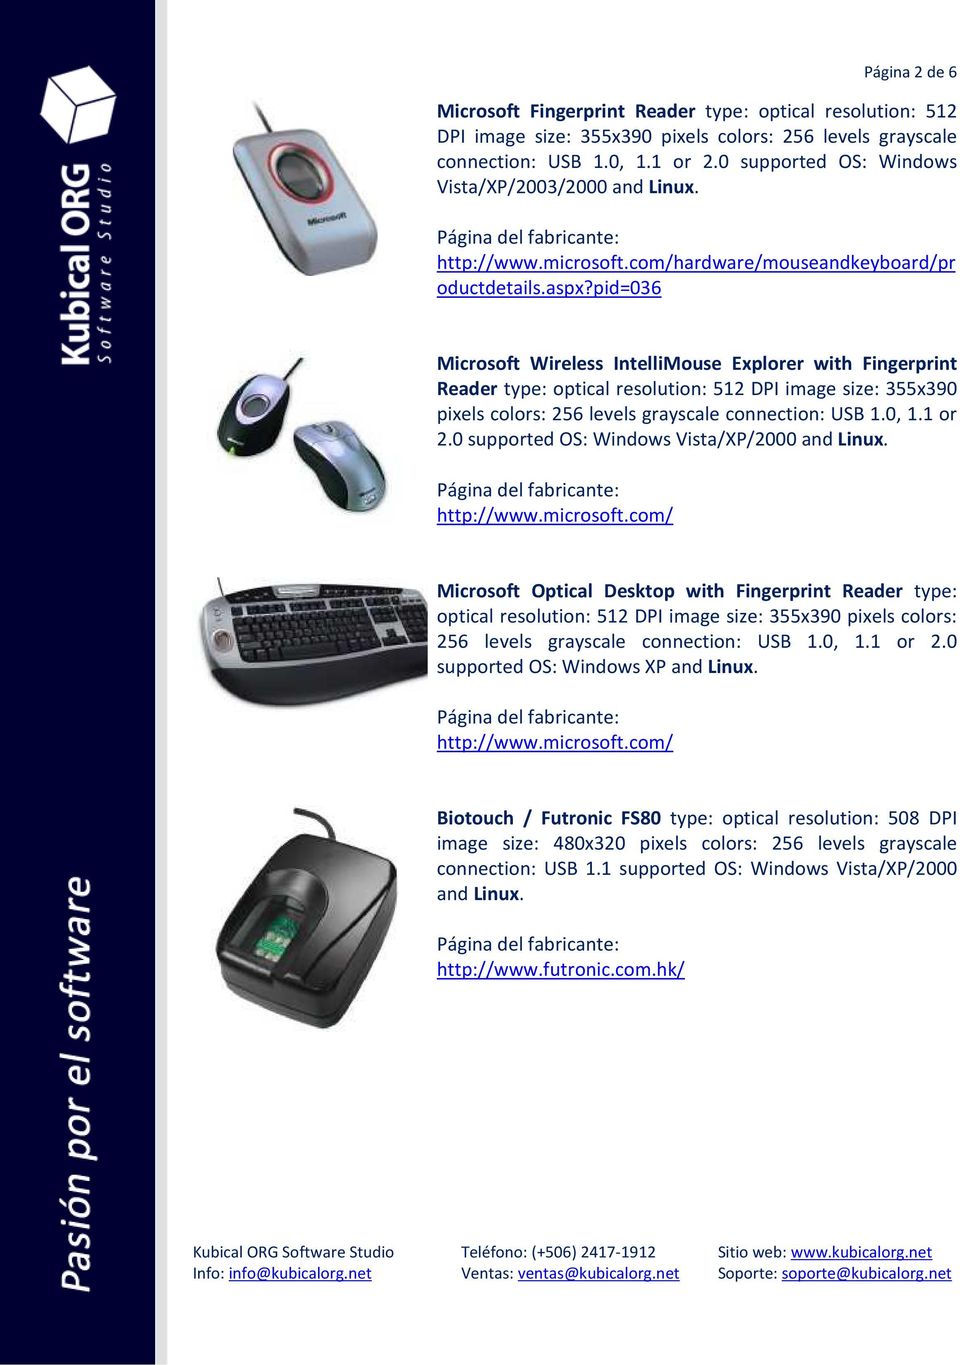 pid=036 Microsoft Wireless IntelliMouse Explorer with Fingerprint Reader type: optical resolution: 512 DPI image size: 355x390 pixels colors: 256 levels grayscale connection: USB 1.0, 1.1 or 2.